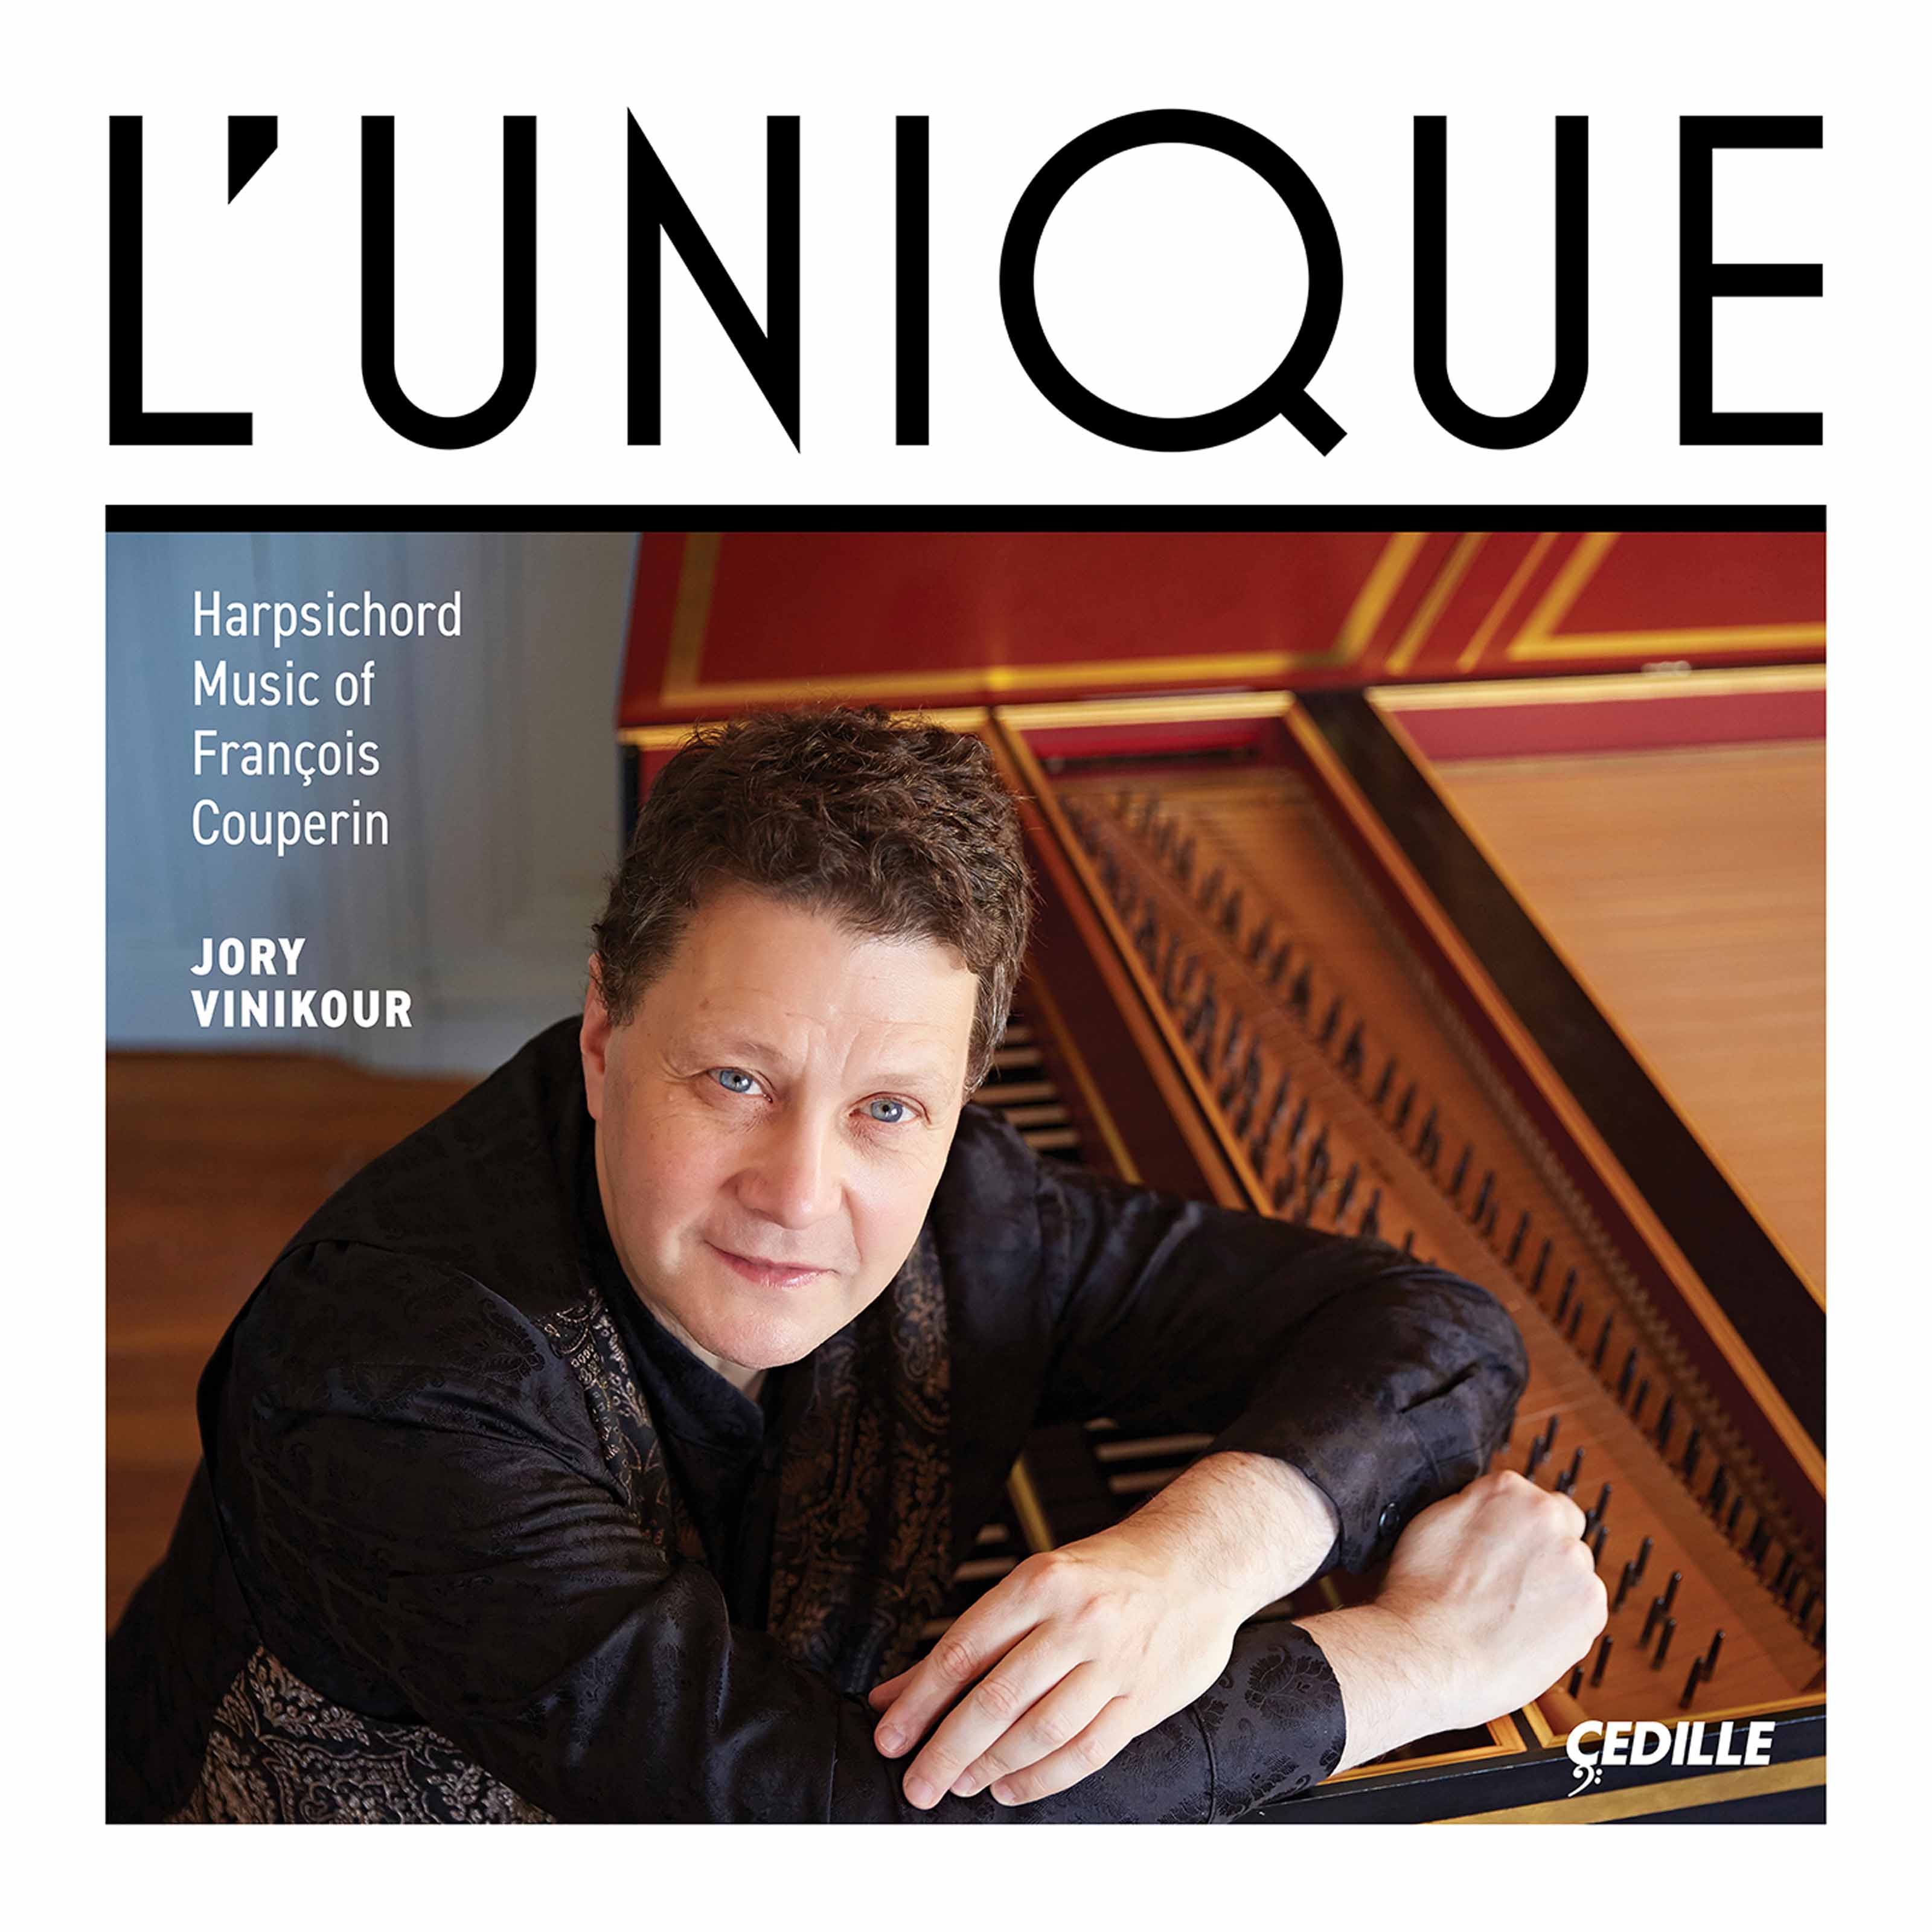 LUNIQUE - Harpsichord Music of Franois Couperin